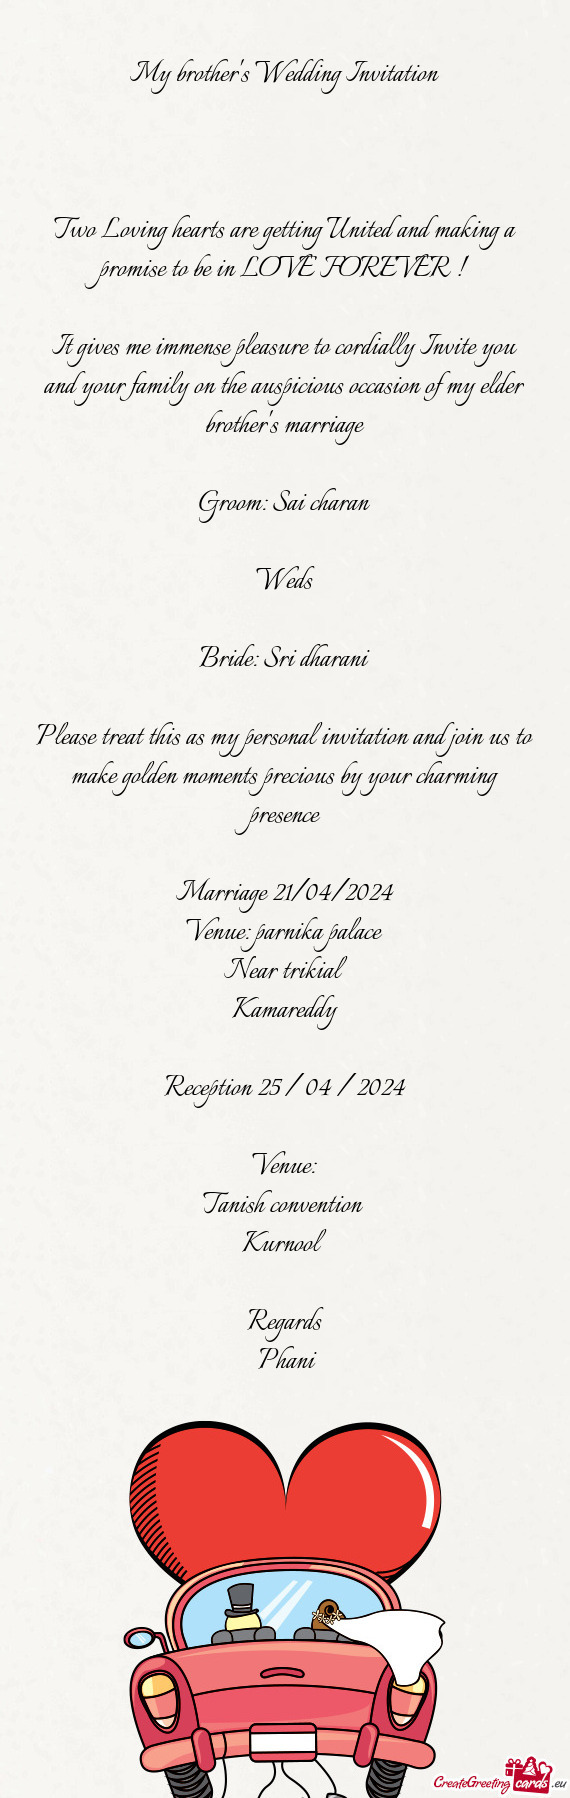 Marriage 21/04/2024